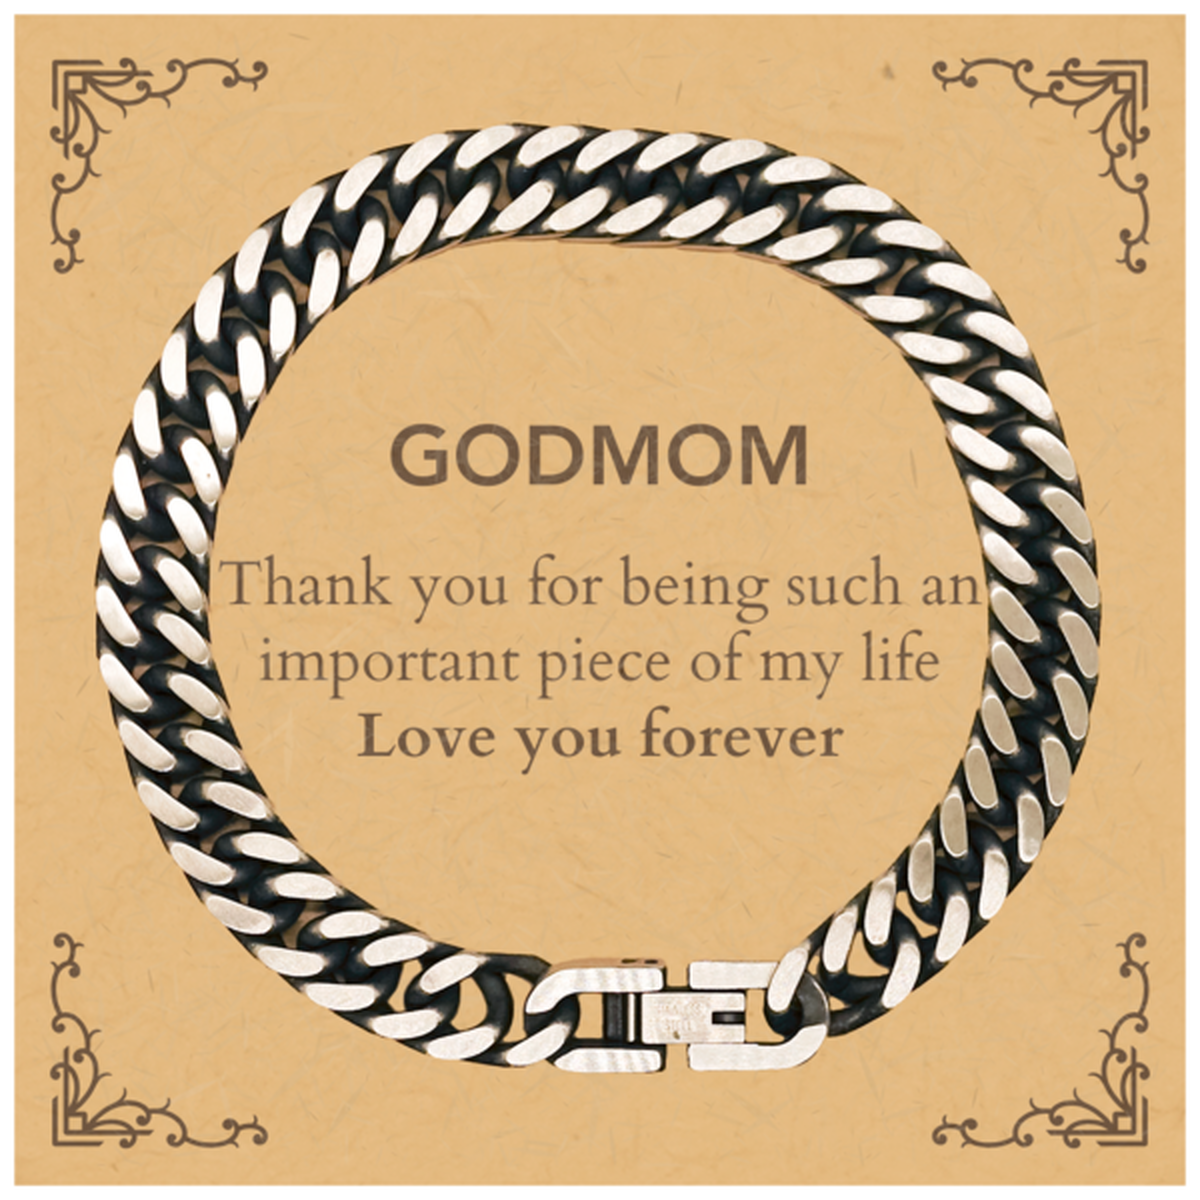 Appropriate Godmom Cuban Link Chain Bracelet Epic Birthday Gifts for Godmom Thank you for being such an important piece of my life Godmom Christmas Mothers Fathers Day